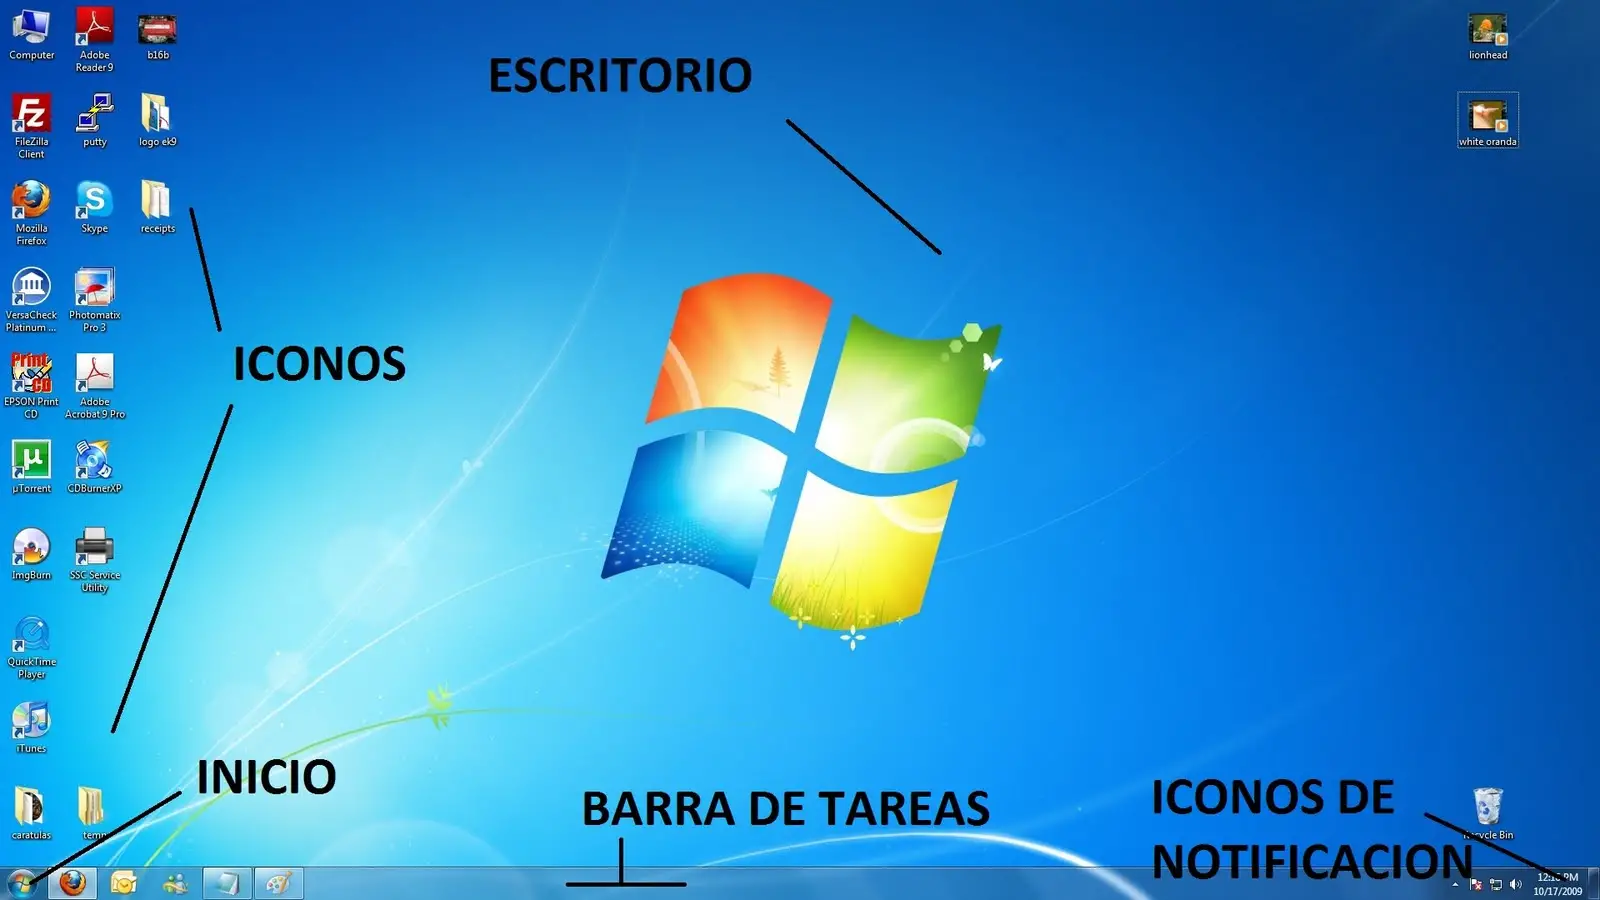 What are the main icons on the Windows desktop?